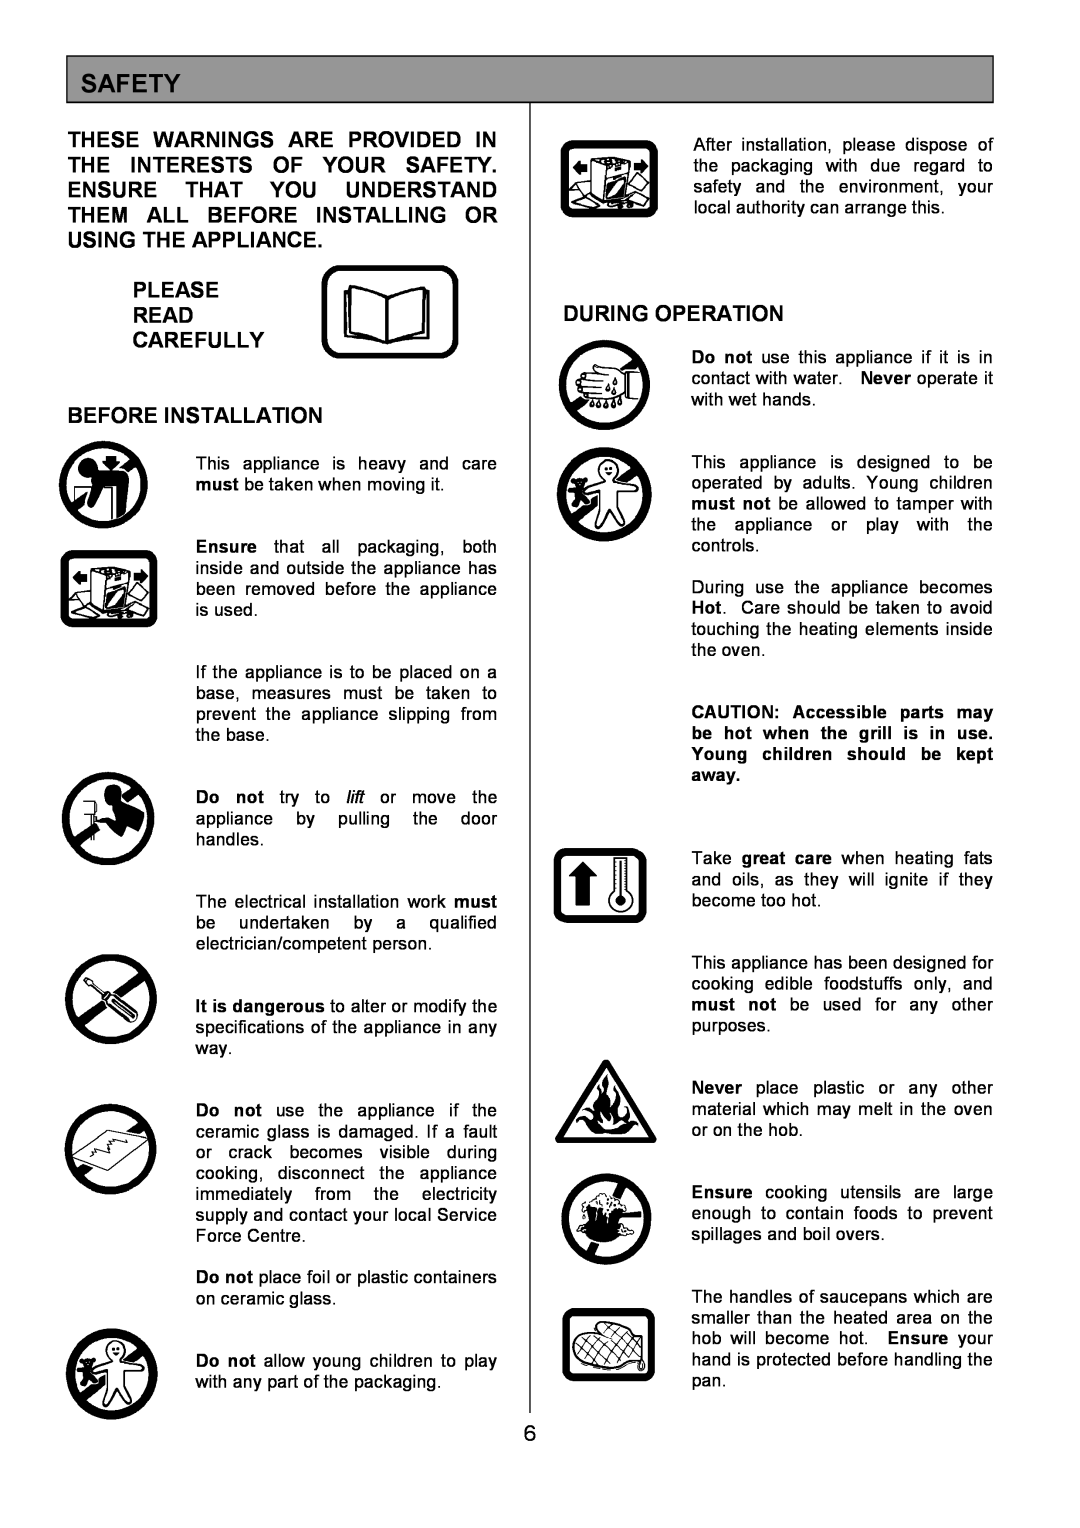 Tricity Bendix SIE514 installation instructions Safety, Please Read Carefully Before Installation, During Operation 